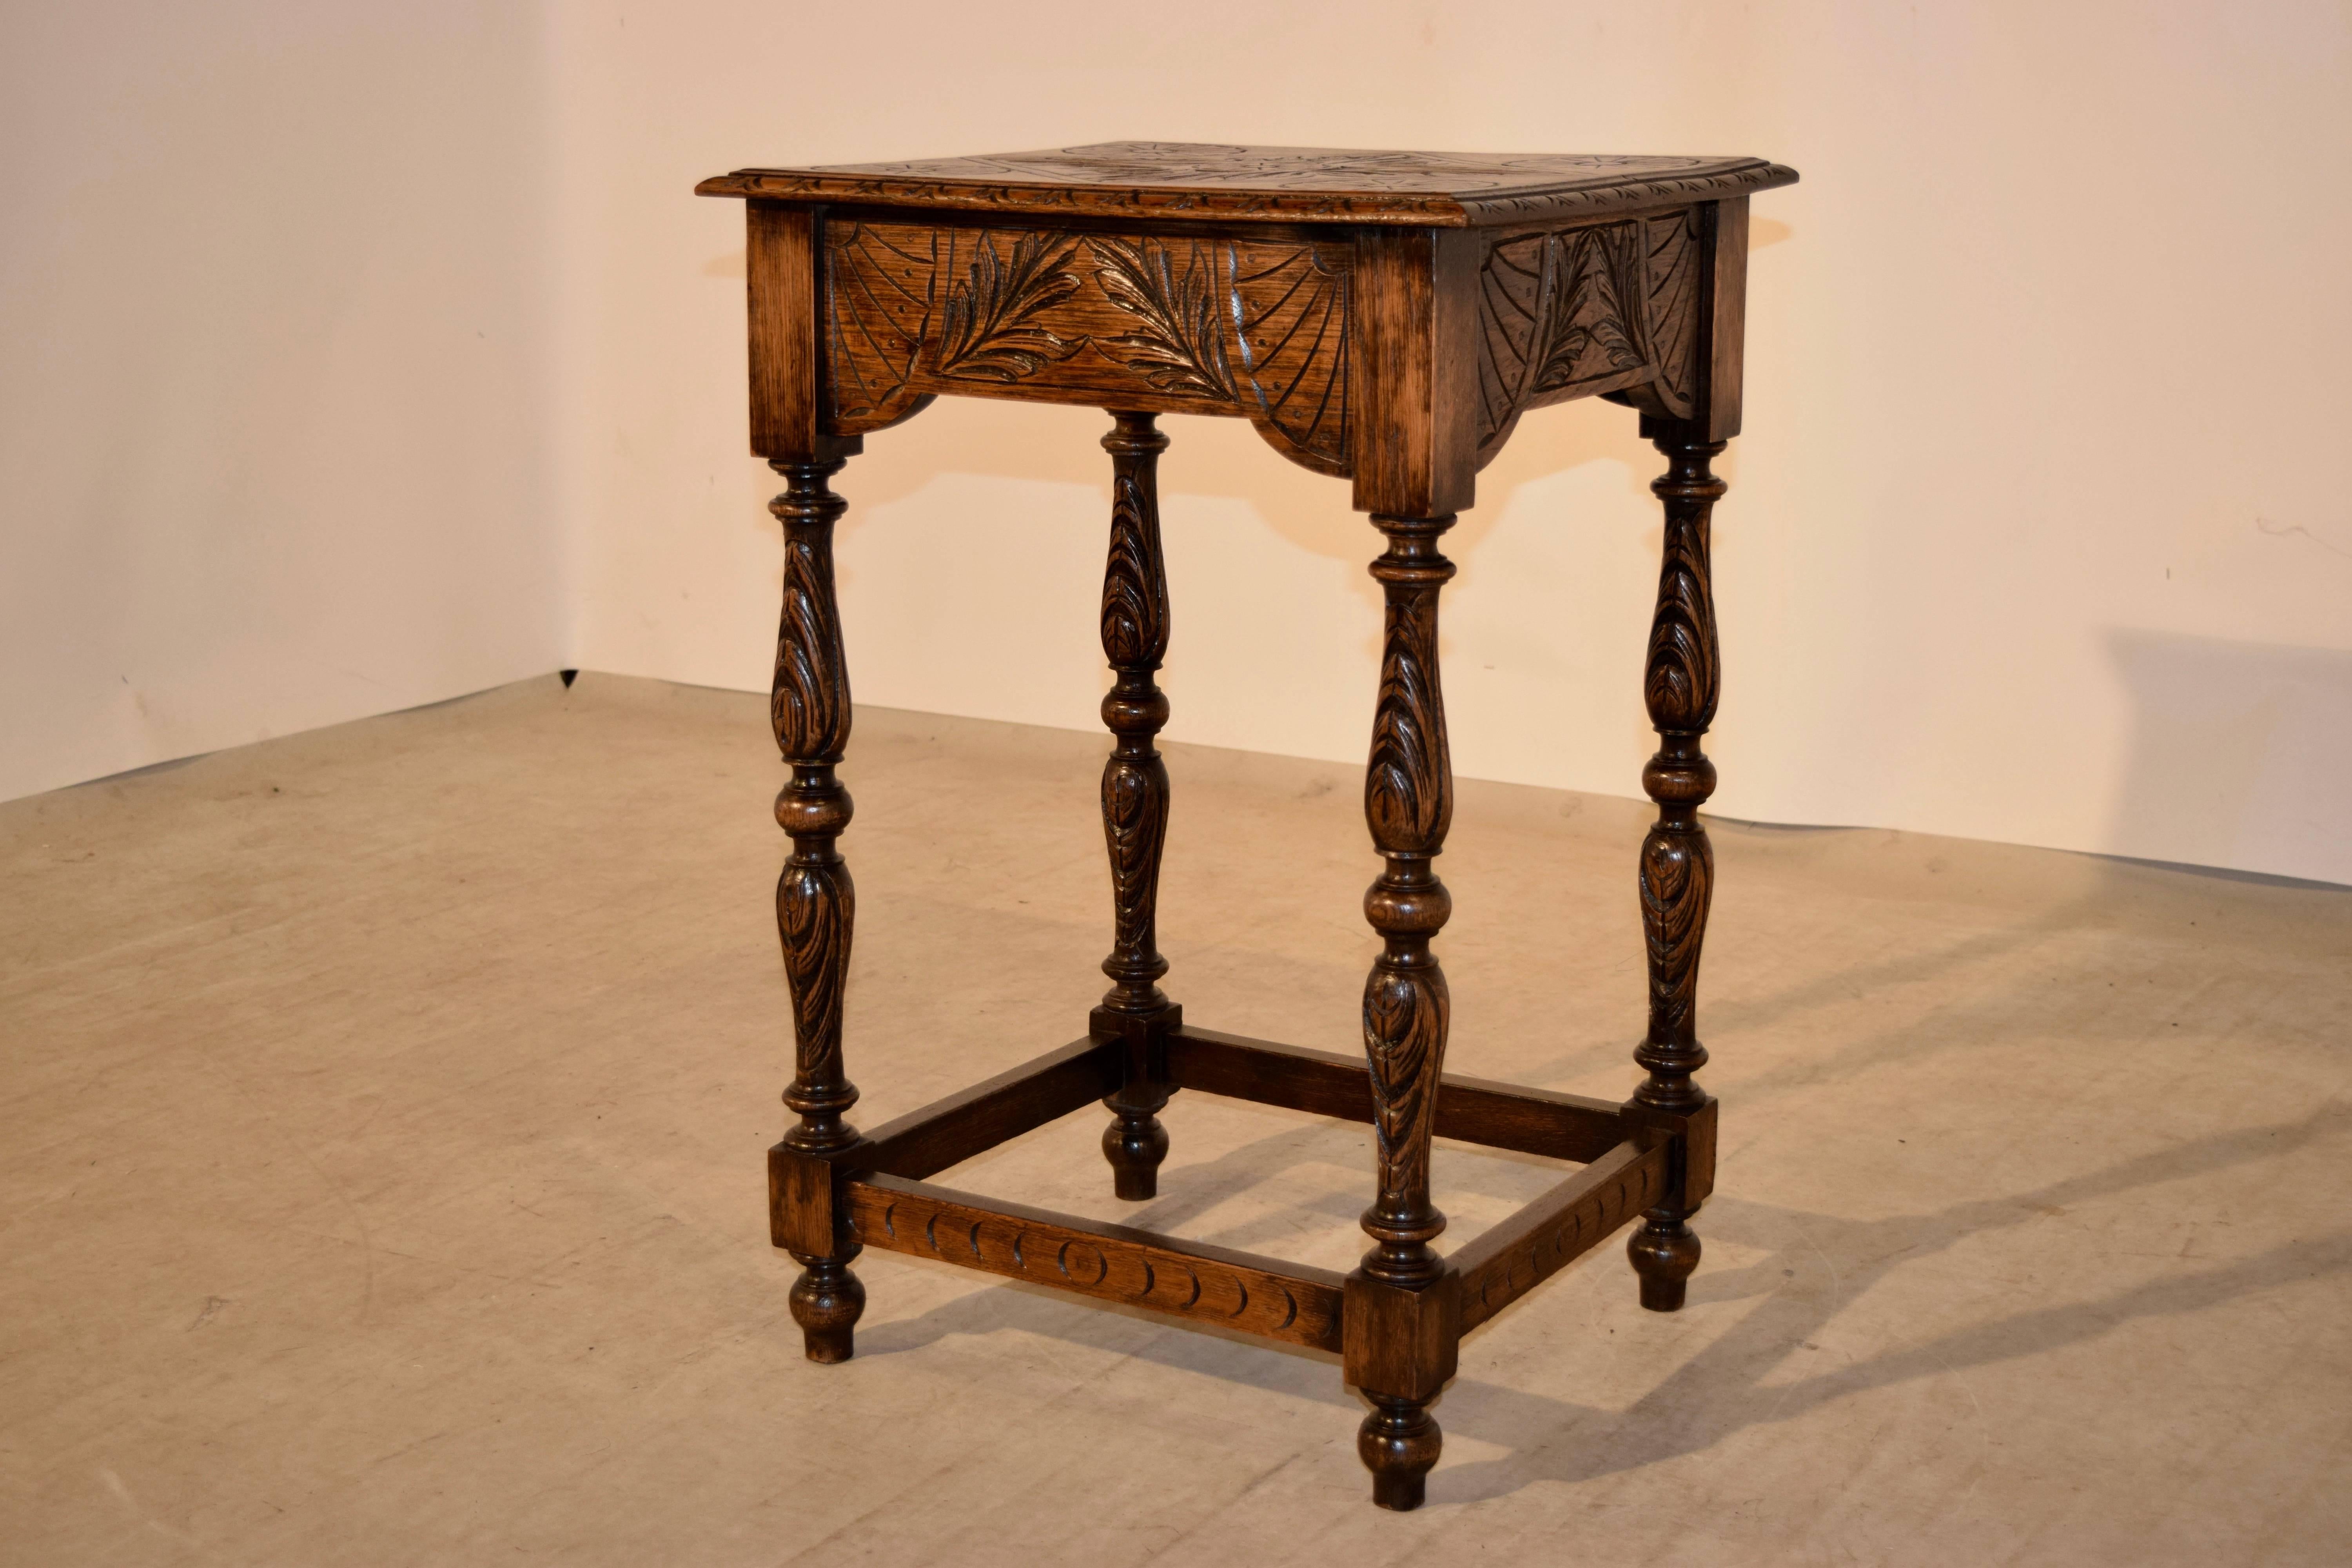 19th century carved oak side table from England. The top is wonderfully hand-carved and has a beveled edge which is also carved decorated. The apron is carved on all four sides for easy placement in a room. The carvings are of fan and leaf designs.